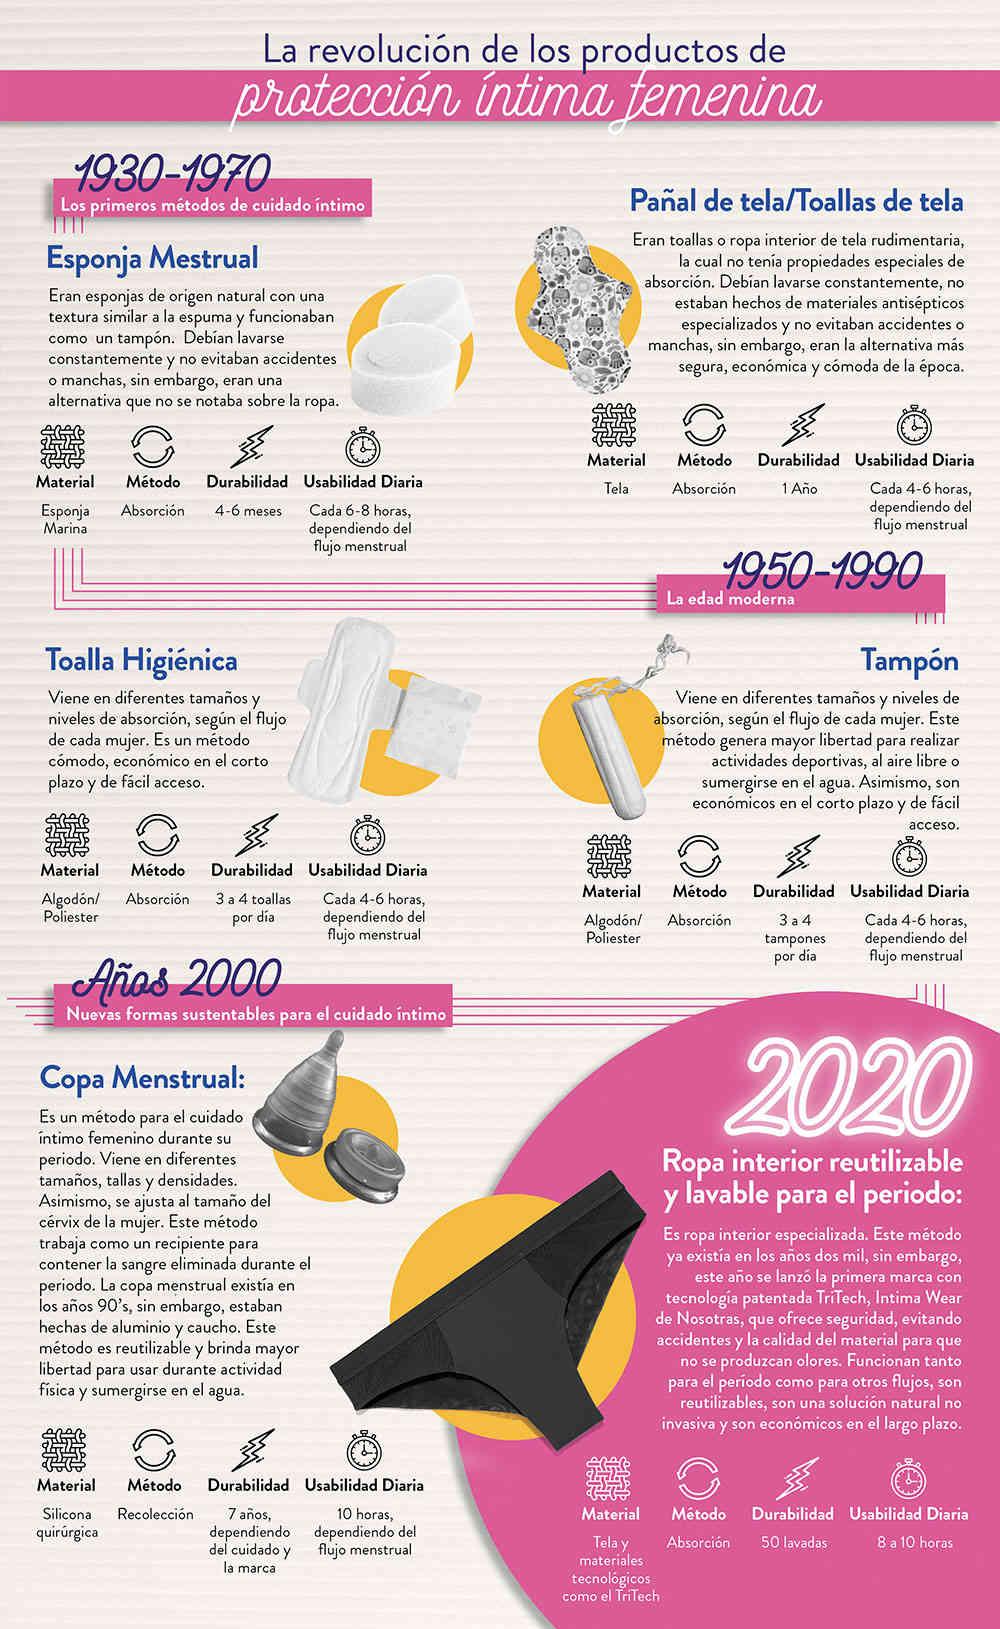 How is the feminine hygiene market in Colombia?